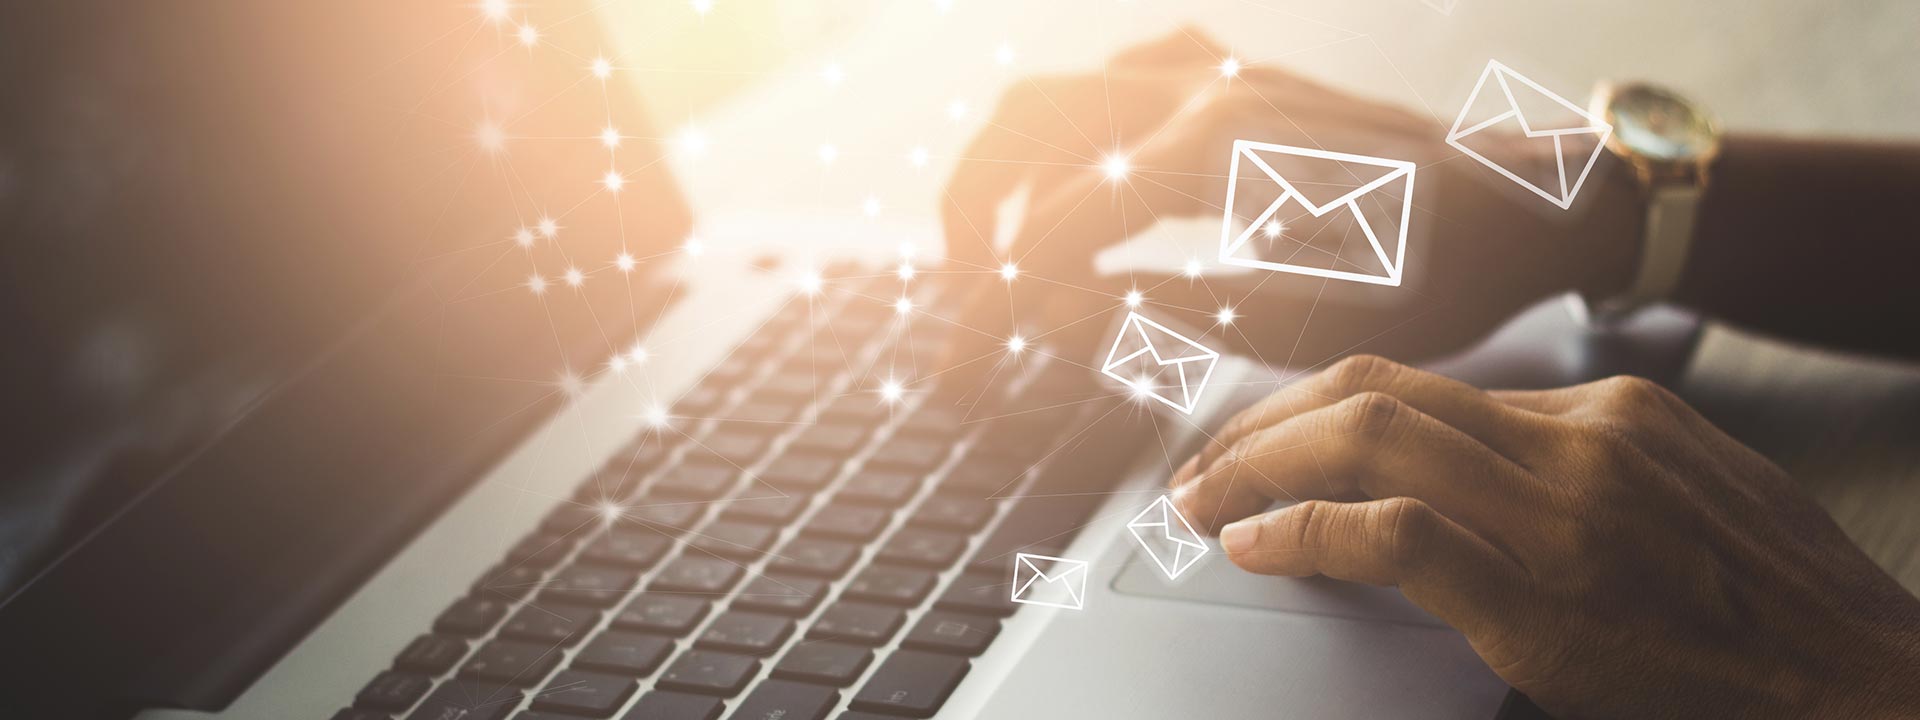 Think Email Marketing Has Lost its Edge? Think Again